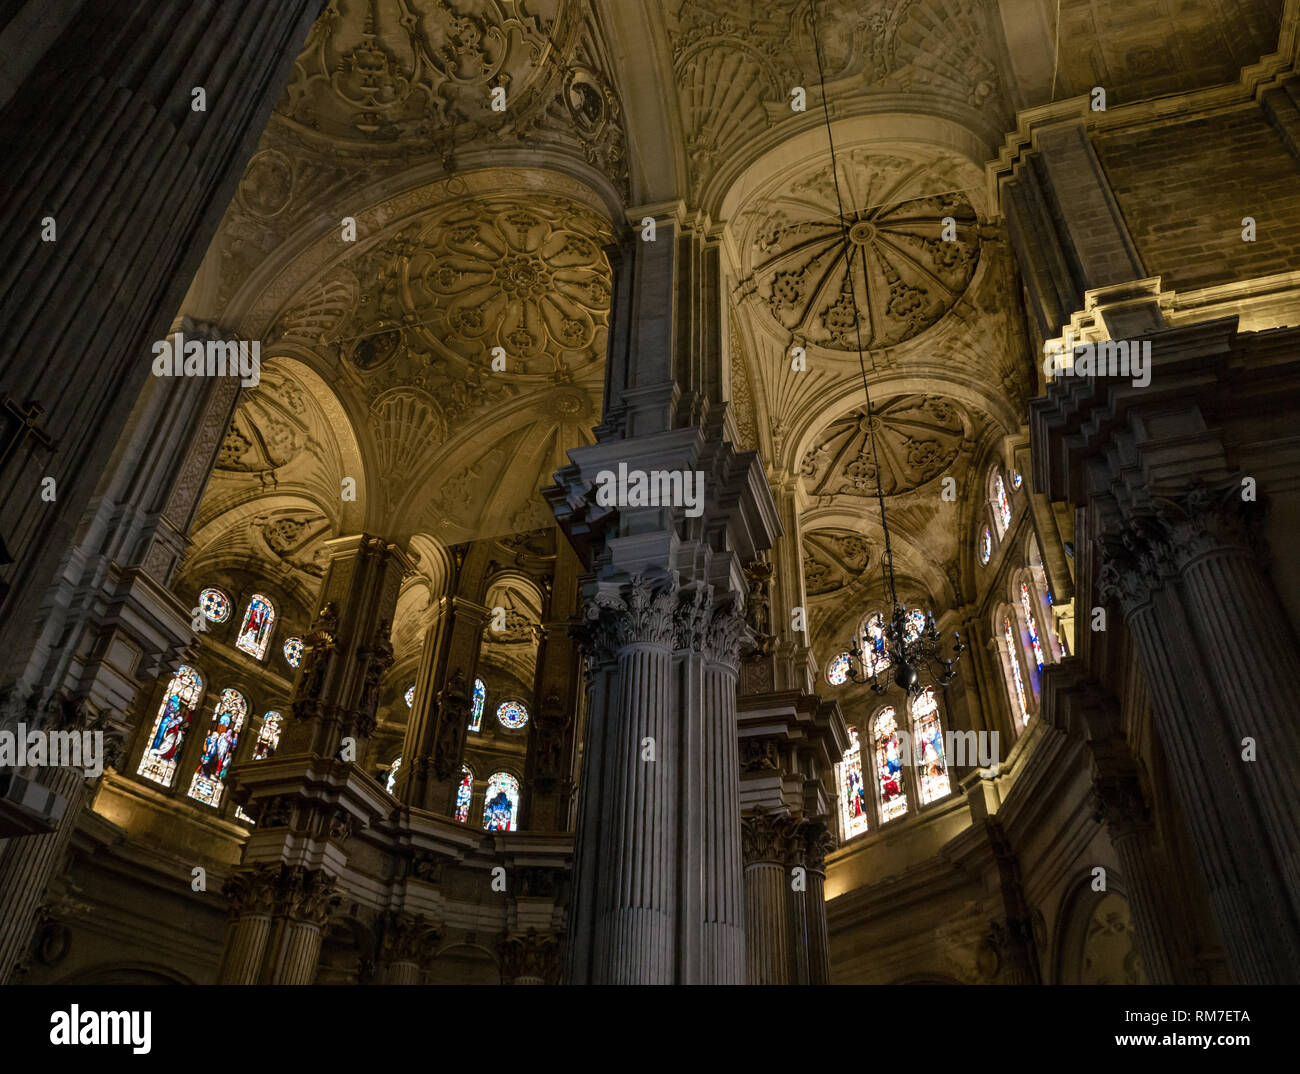 Interior view, of vaulted ceiling of ambulatory, Cathedral Basilica, Malaga, Andalusia, Spain Stock Photo